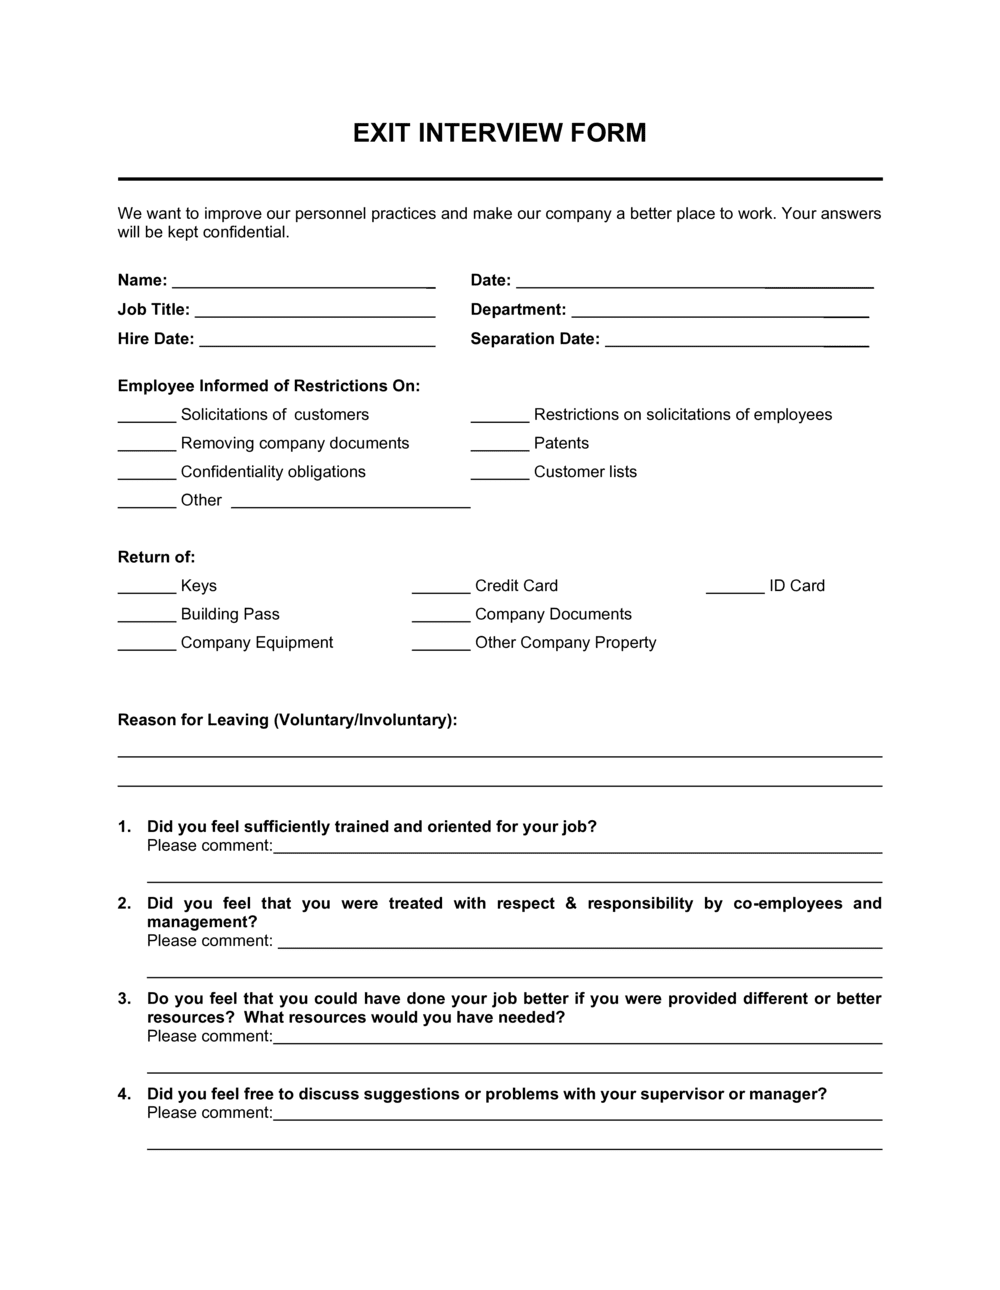 Exit Interview Form Template By Business In A Box